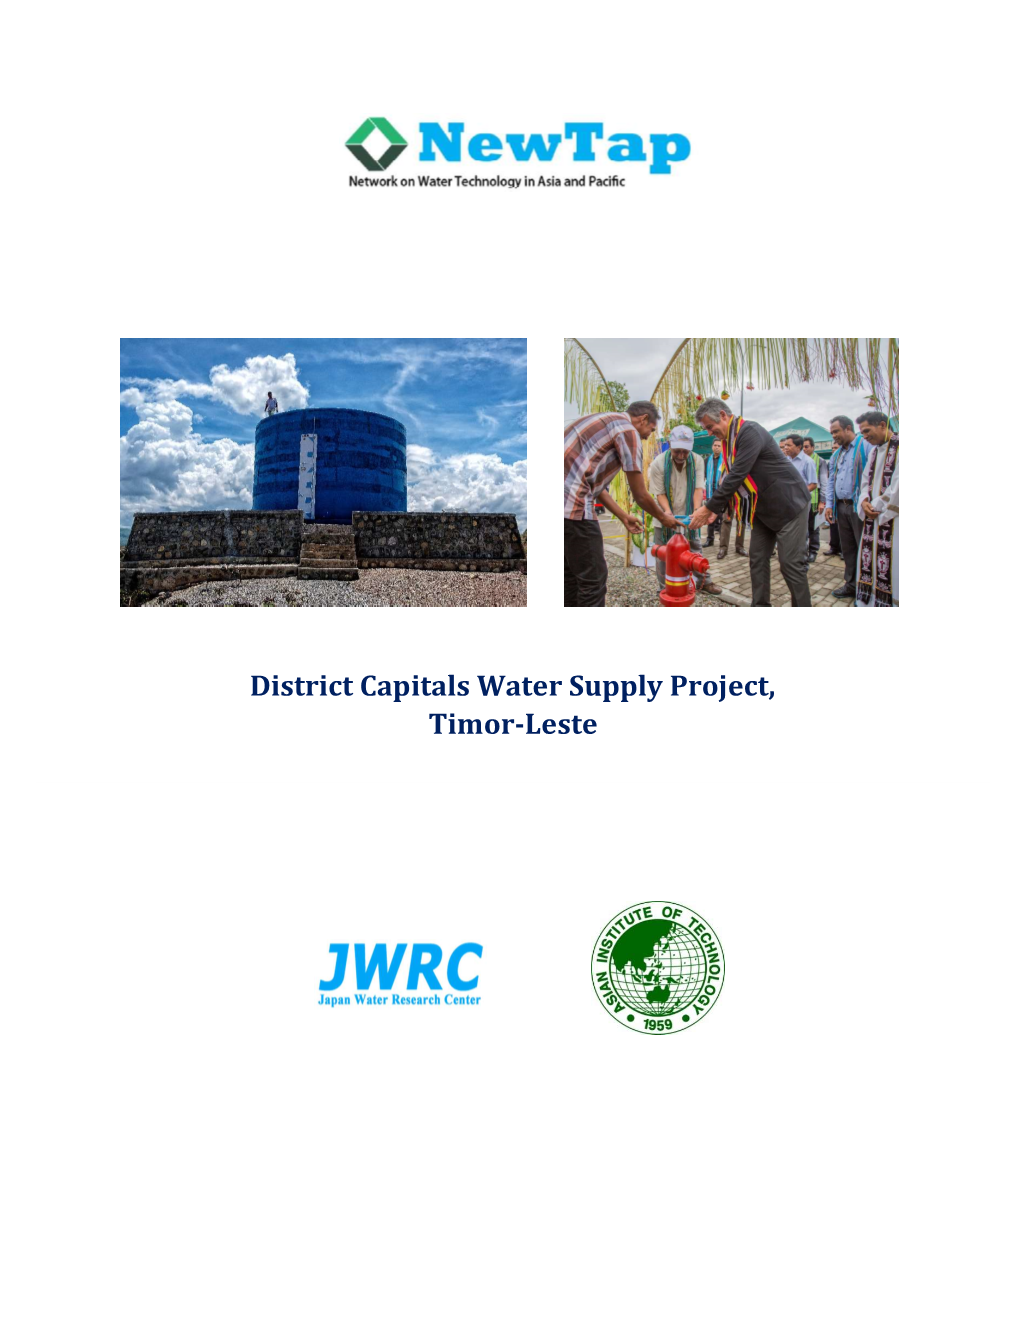 District Capitals Water Supply Project, Timor-Leste Type : Water Supply and Urban Infrastructure